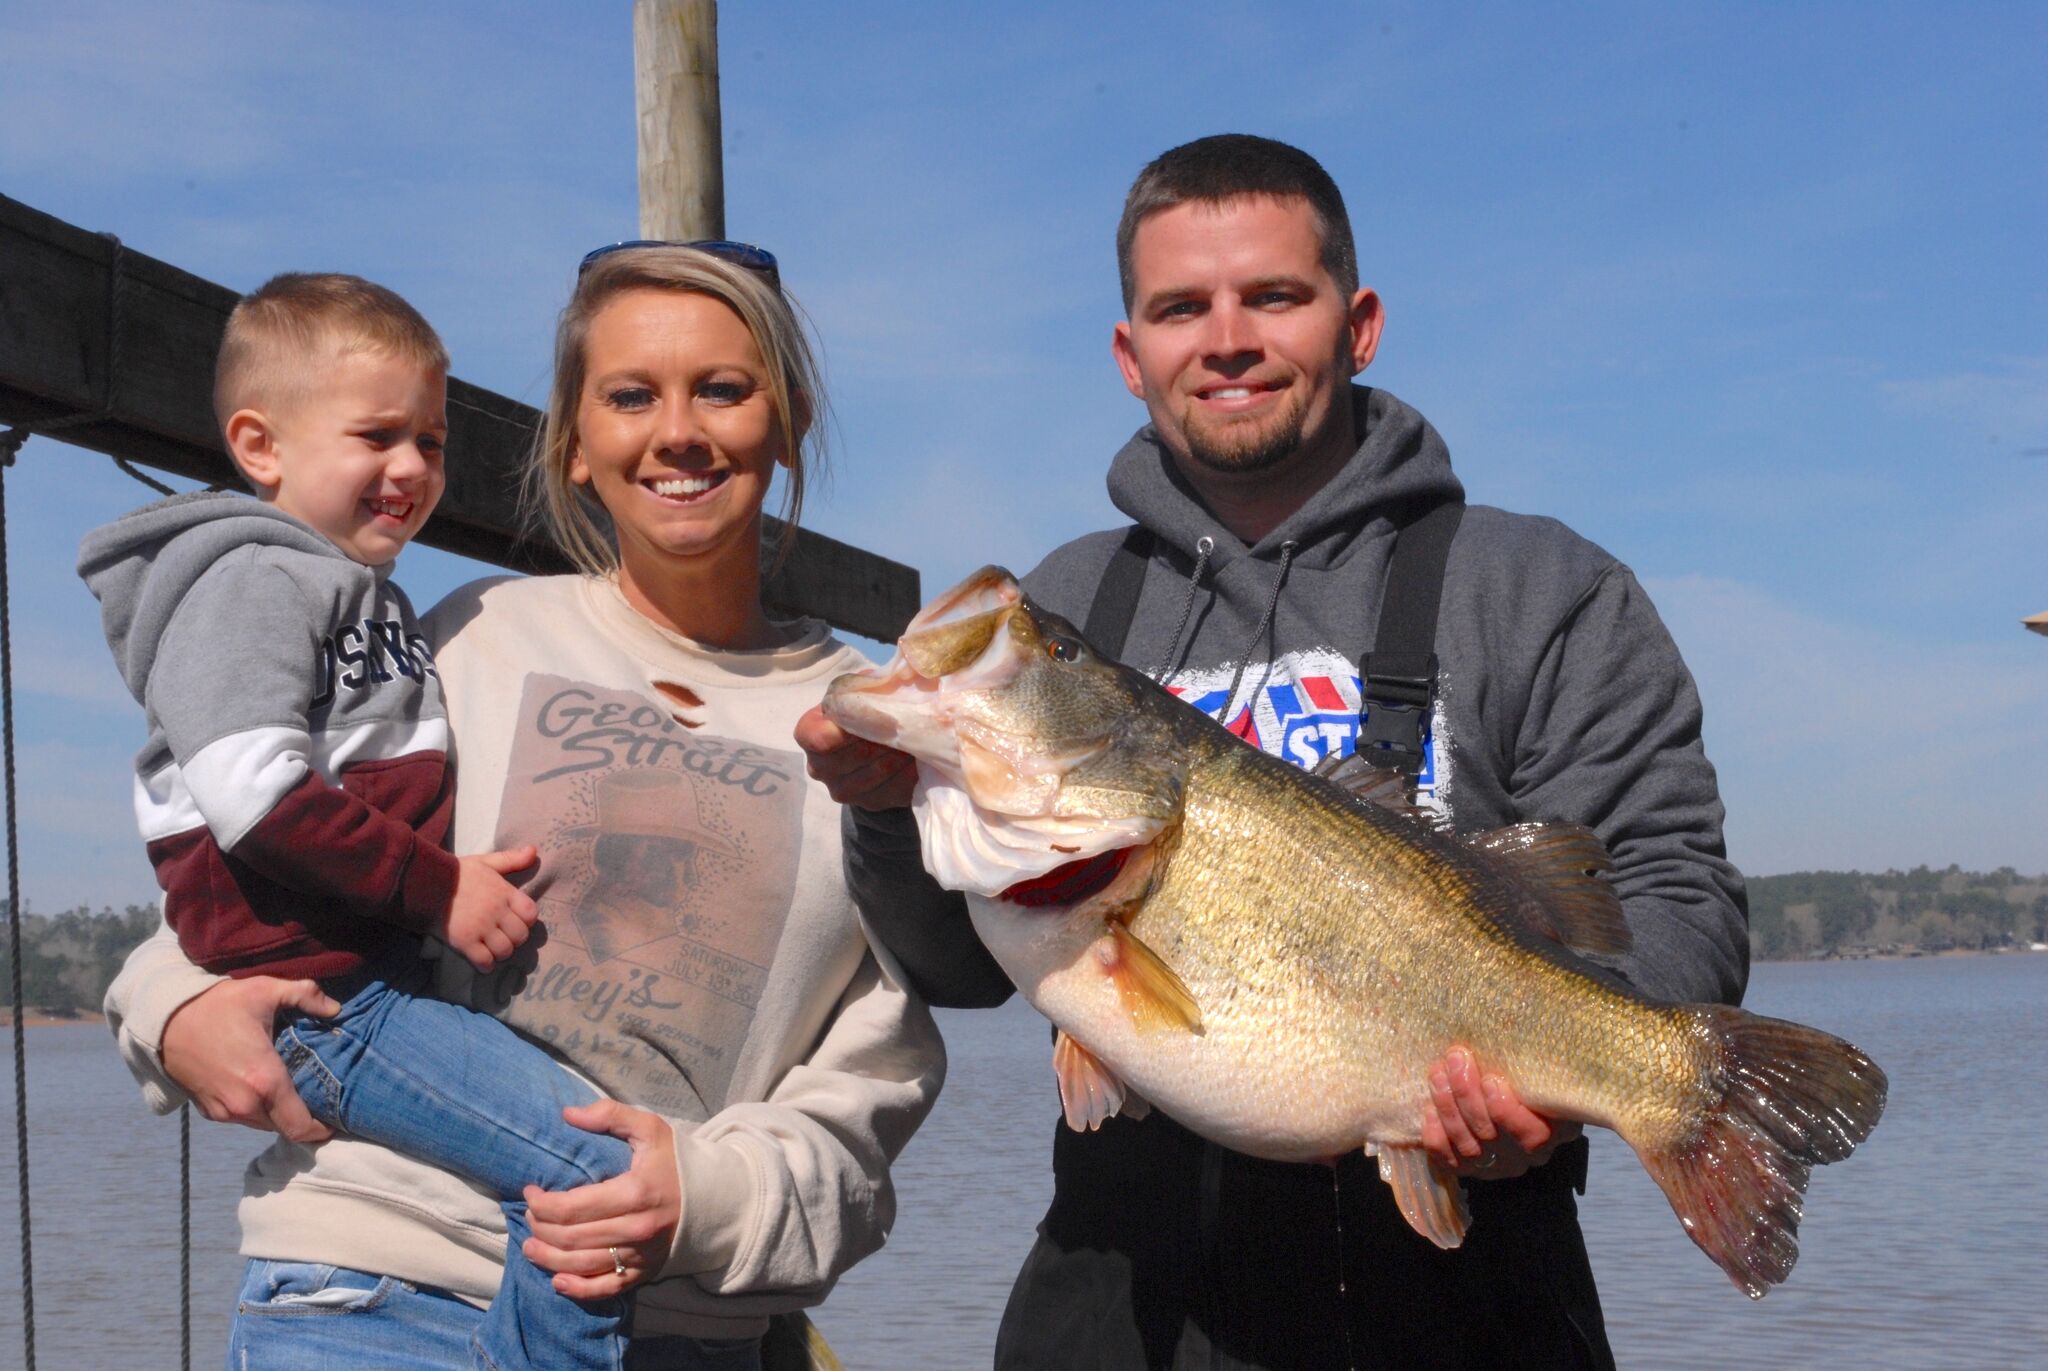 Record busters: Experts debate which Texas lake will produce next big bass